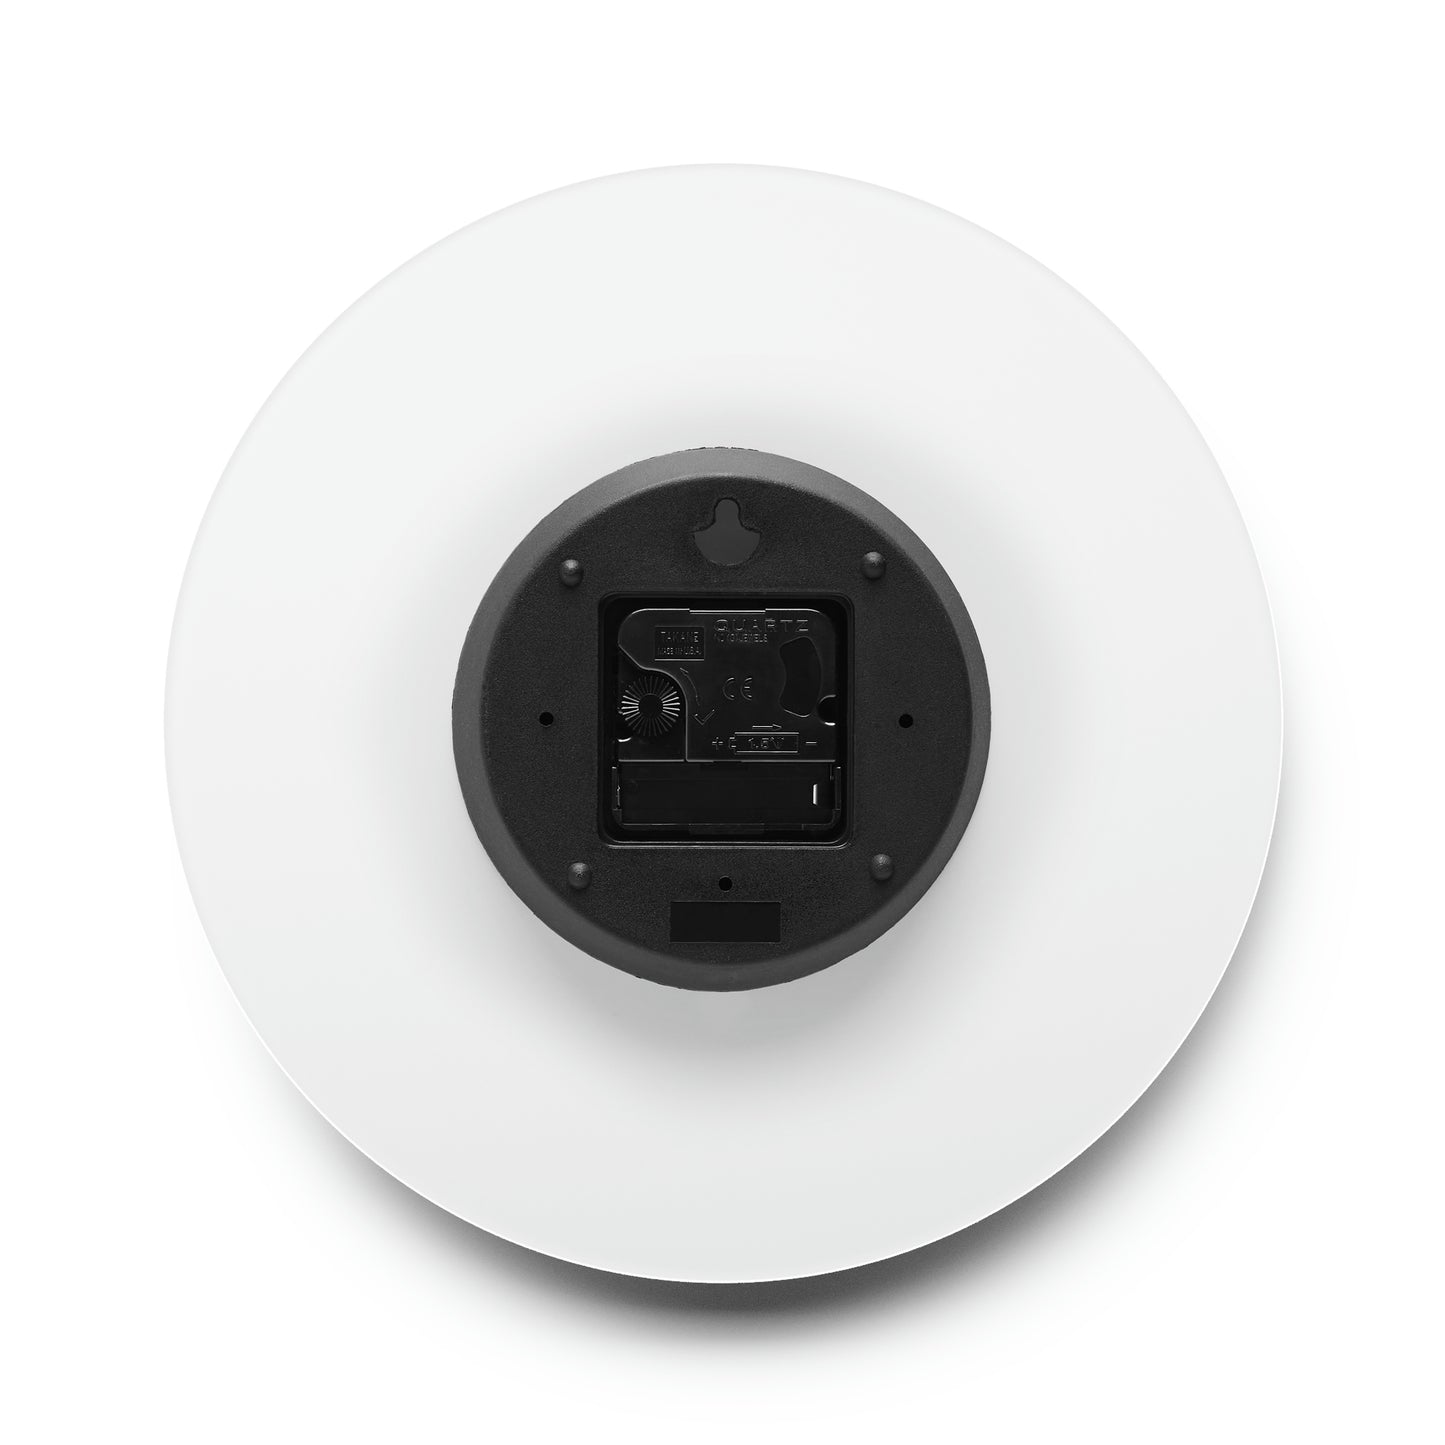 a white plate with a black button on it